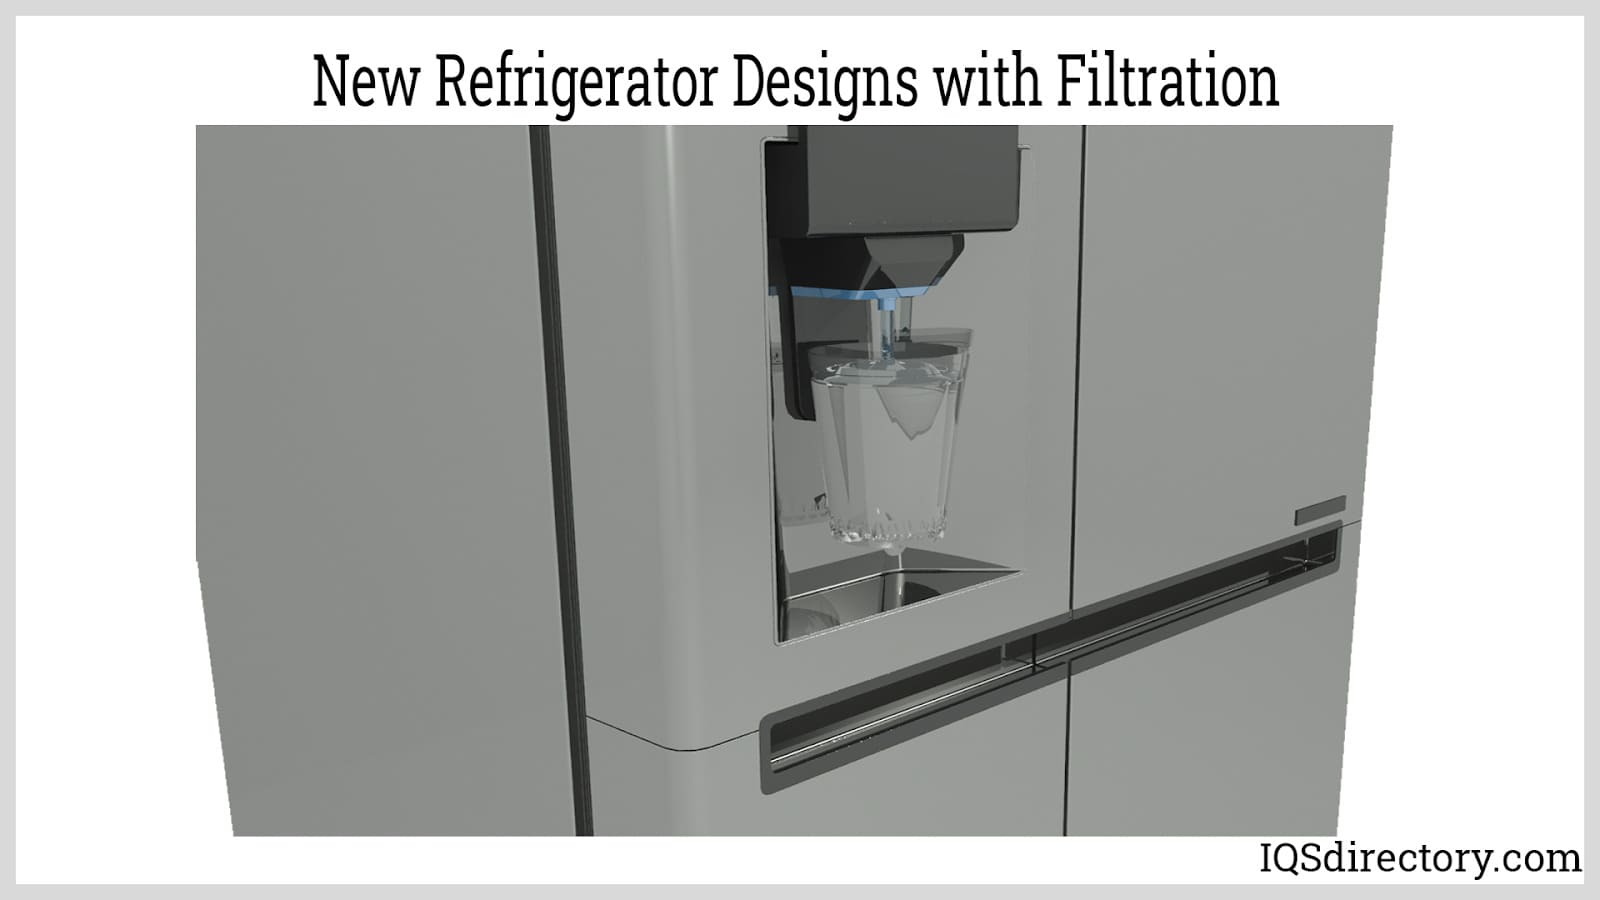 New Refrigerator Designs with Filtration